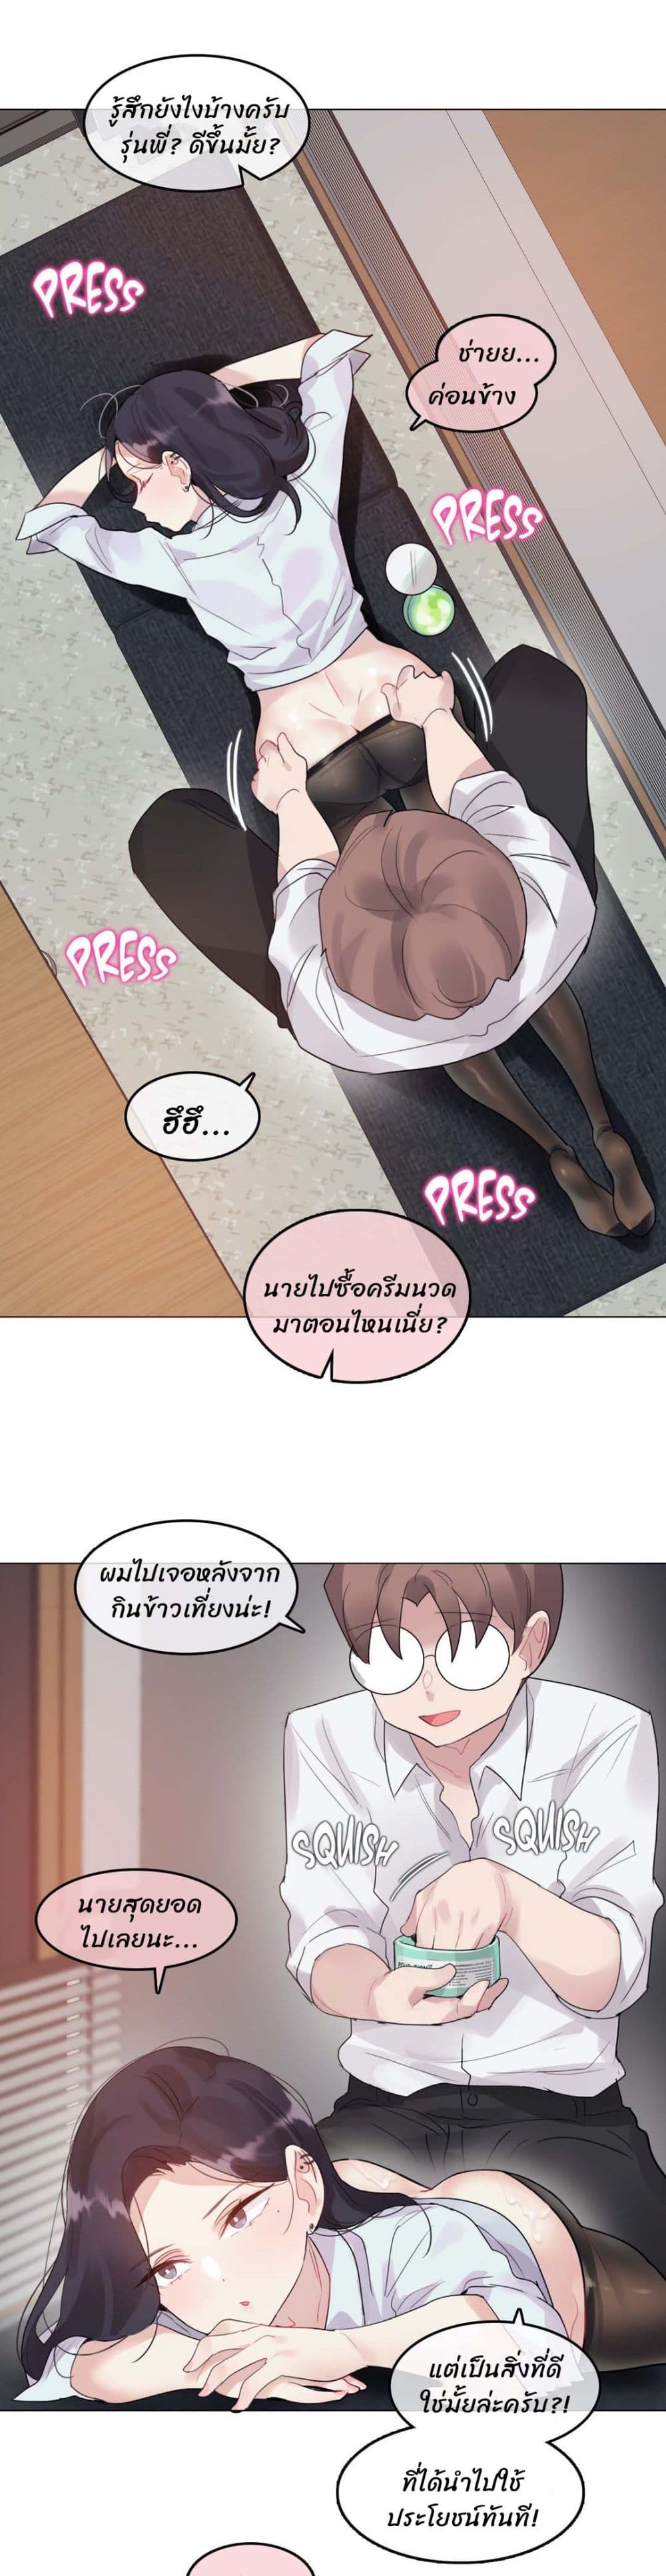 A Pervert's Daily Life 106-106